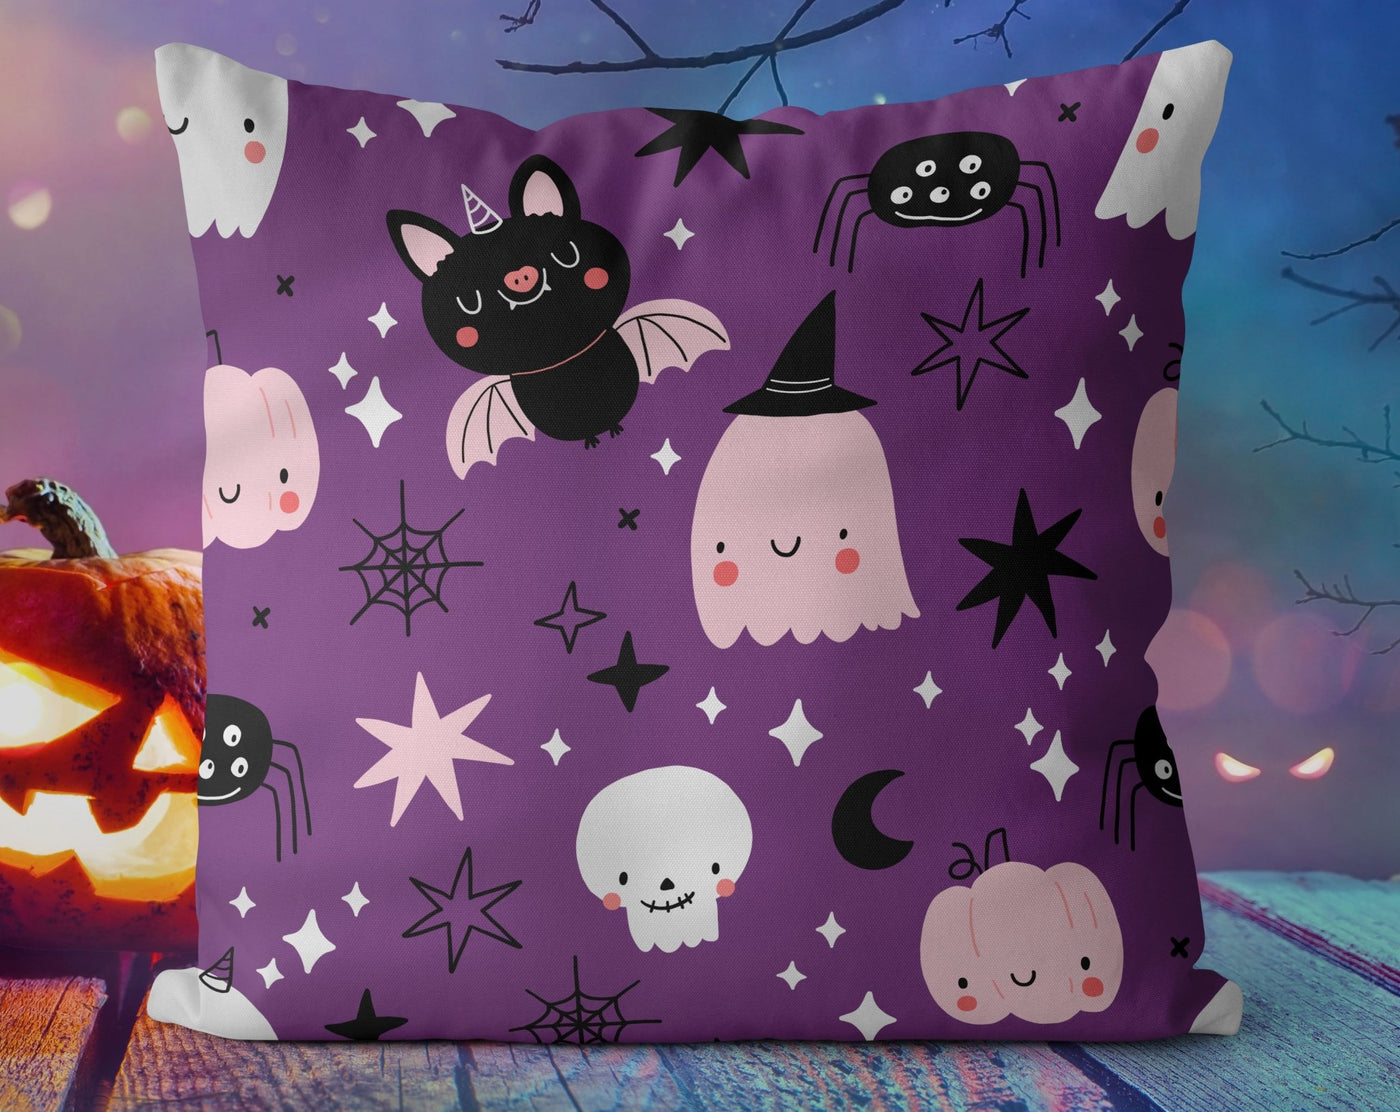 Halloween Cute Bats and Ghost Witches Purple Pillow Throw Cover - Cush Potato Pillows